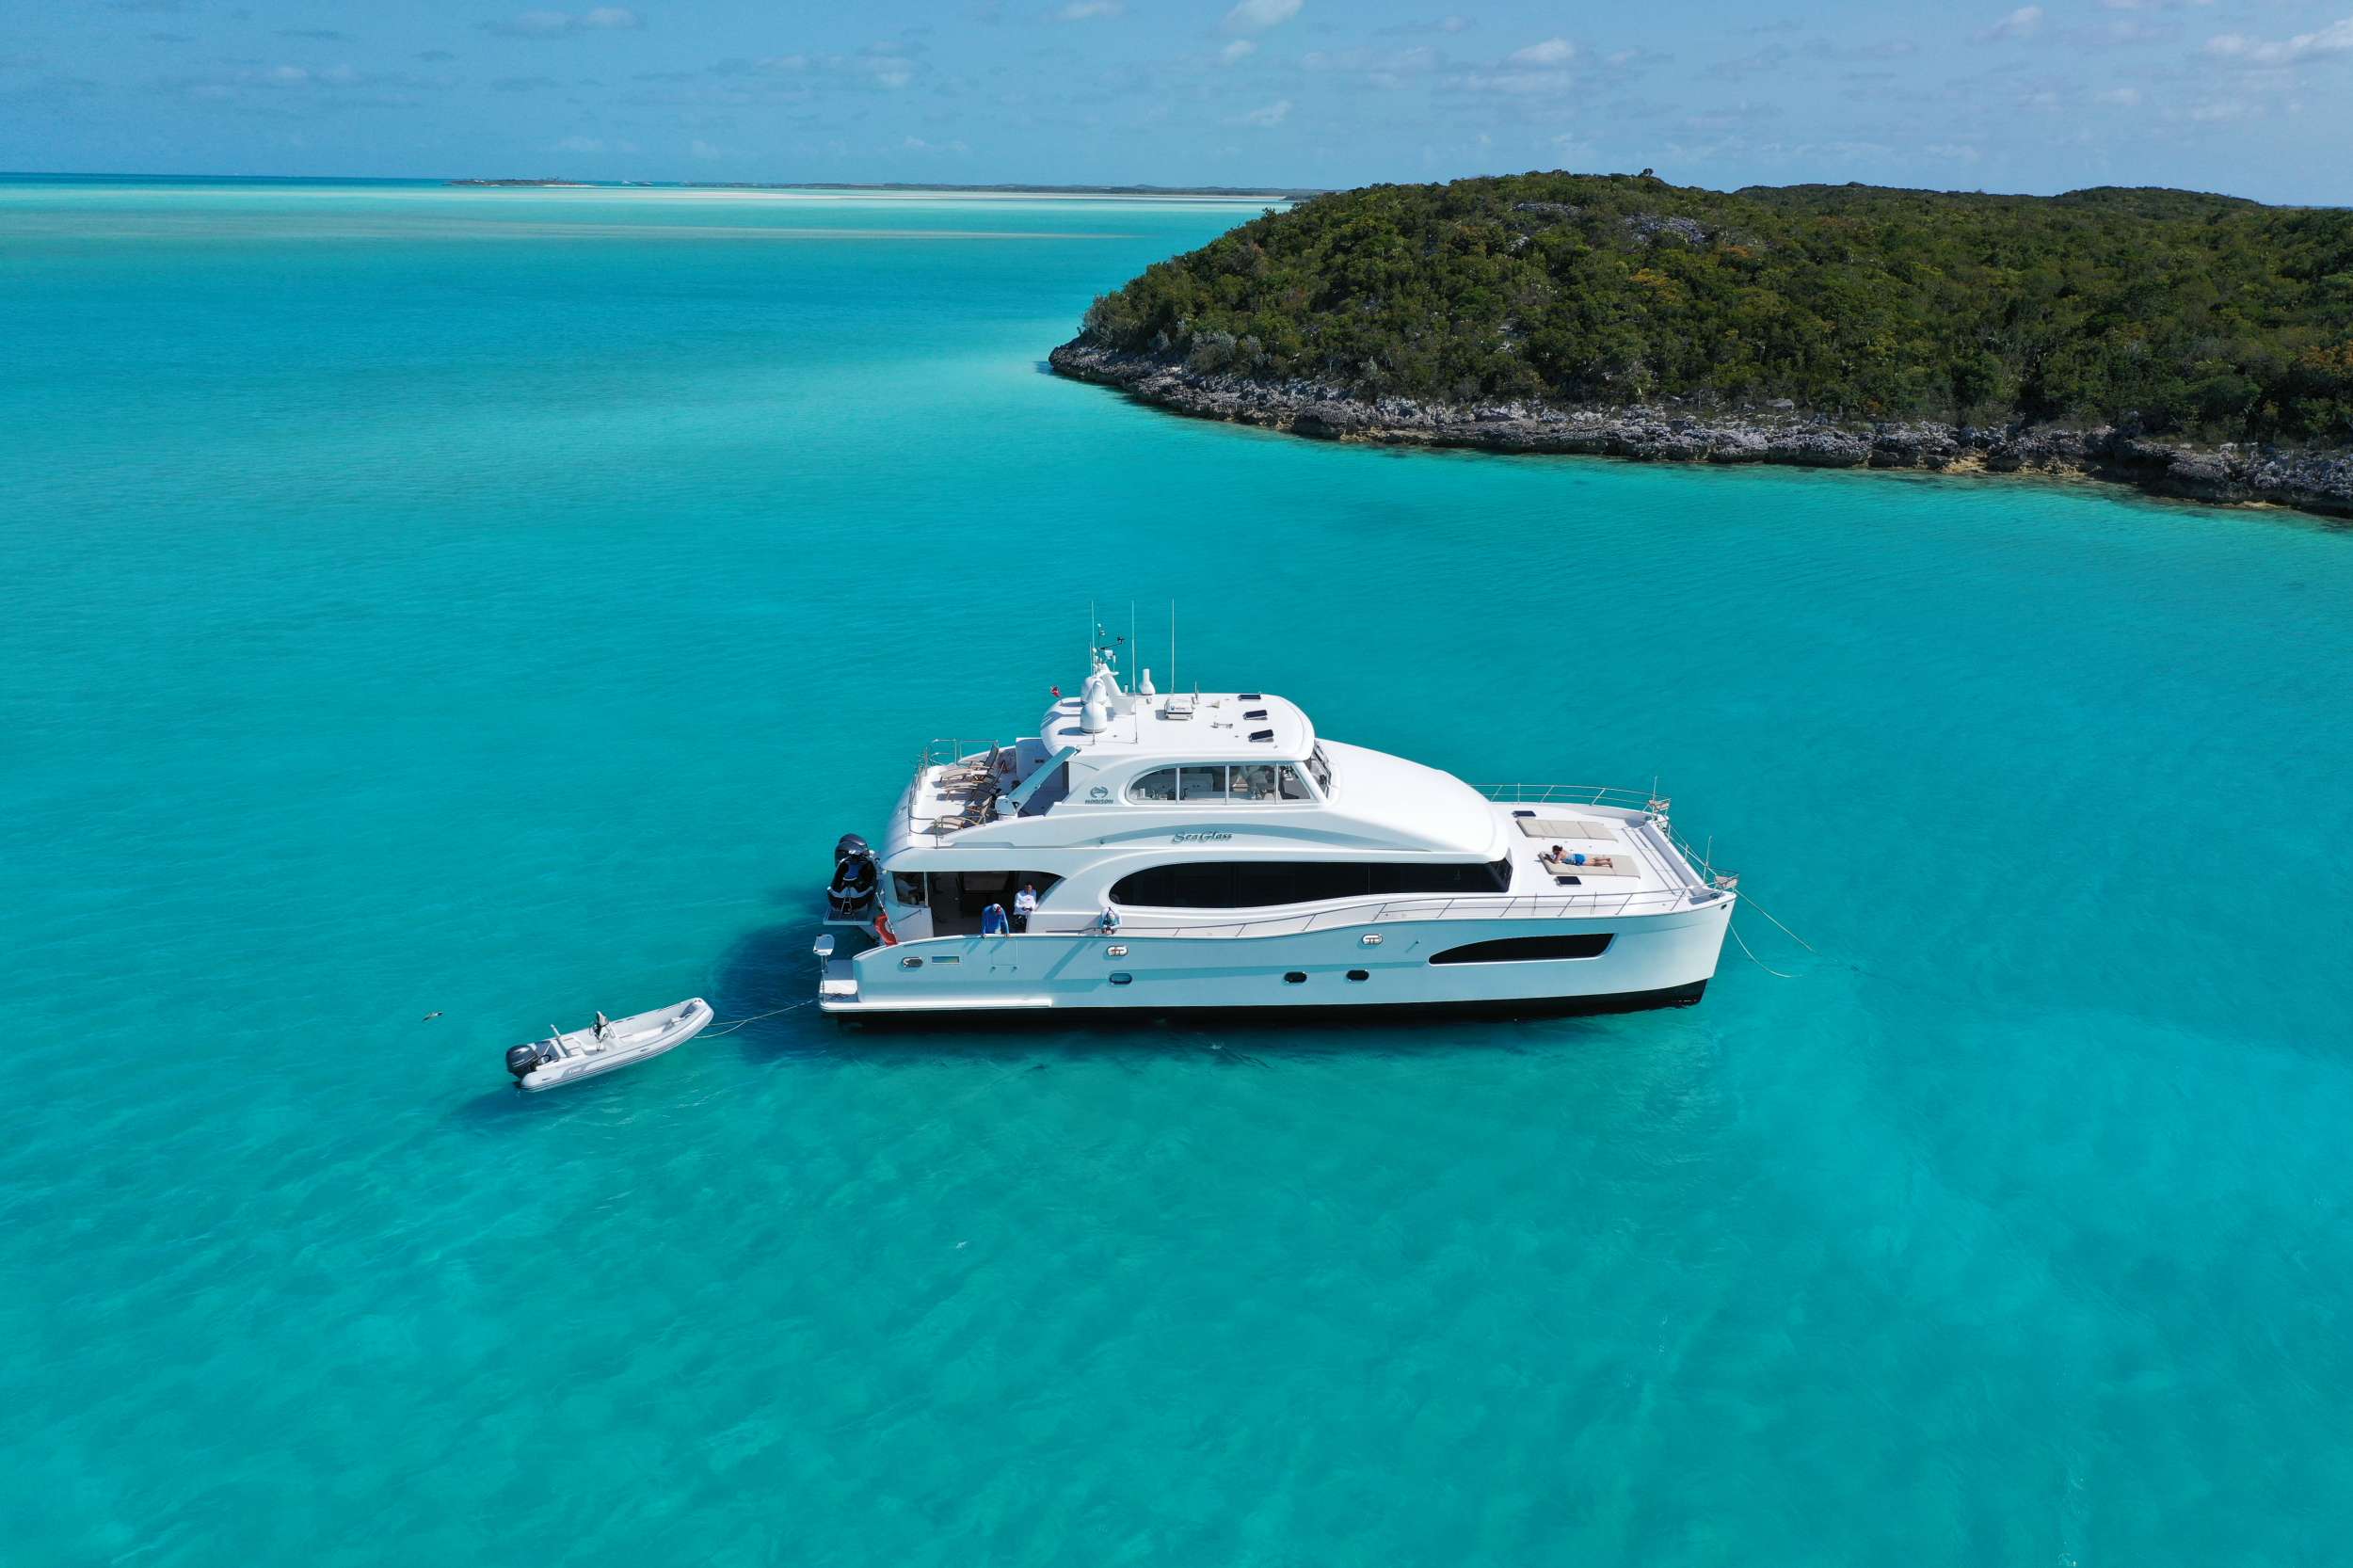 Seaglass Crewed Powercat Special Offers Inclusive Pricing in the BVI